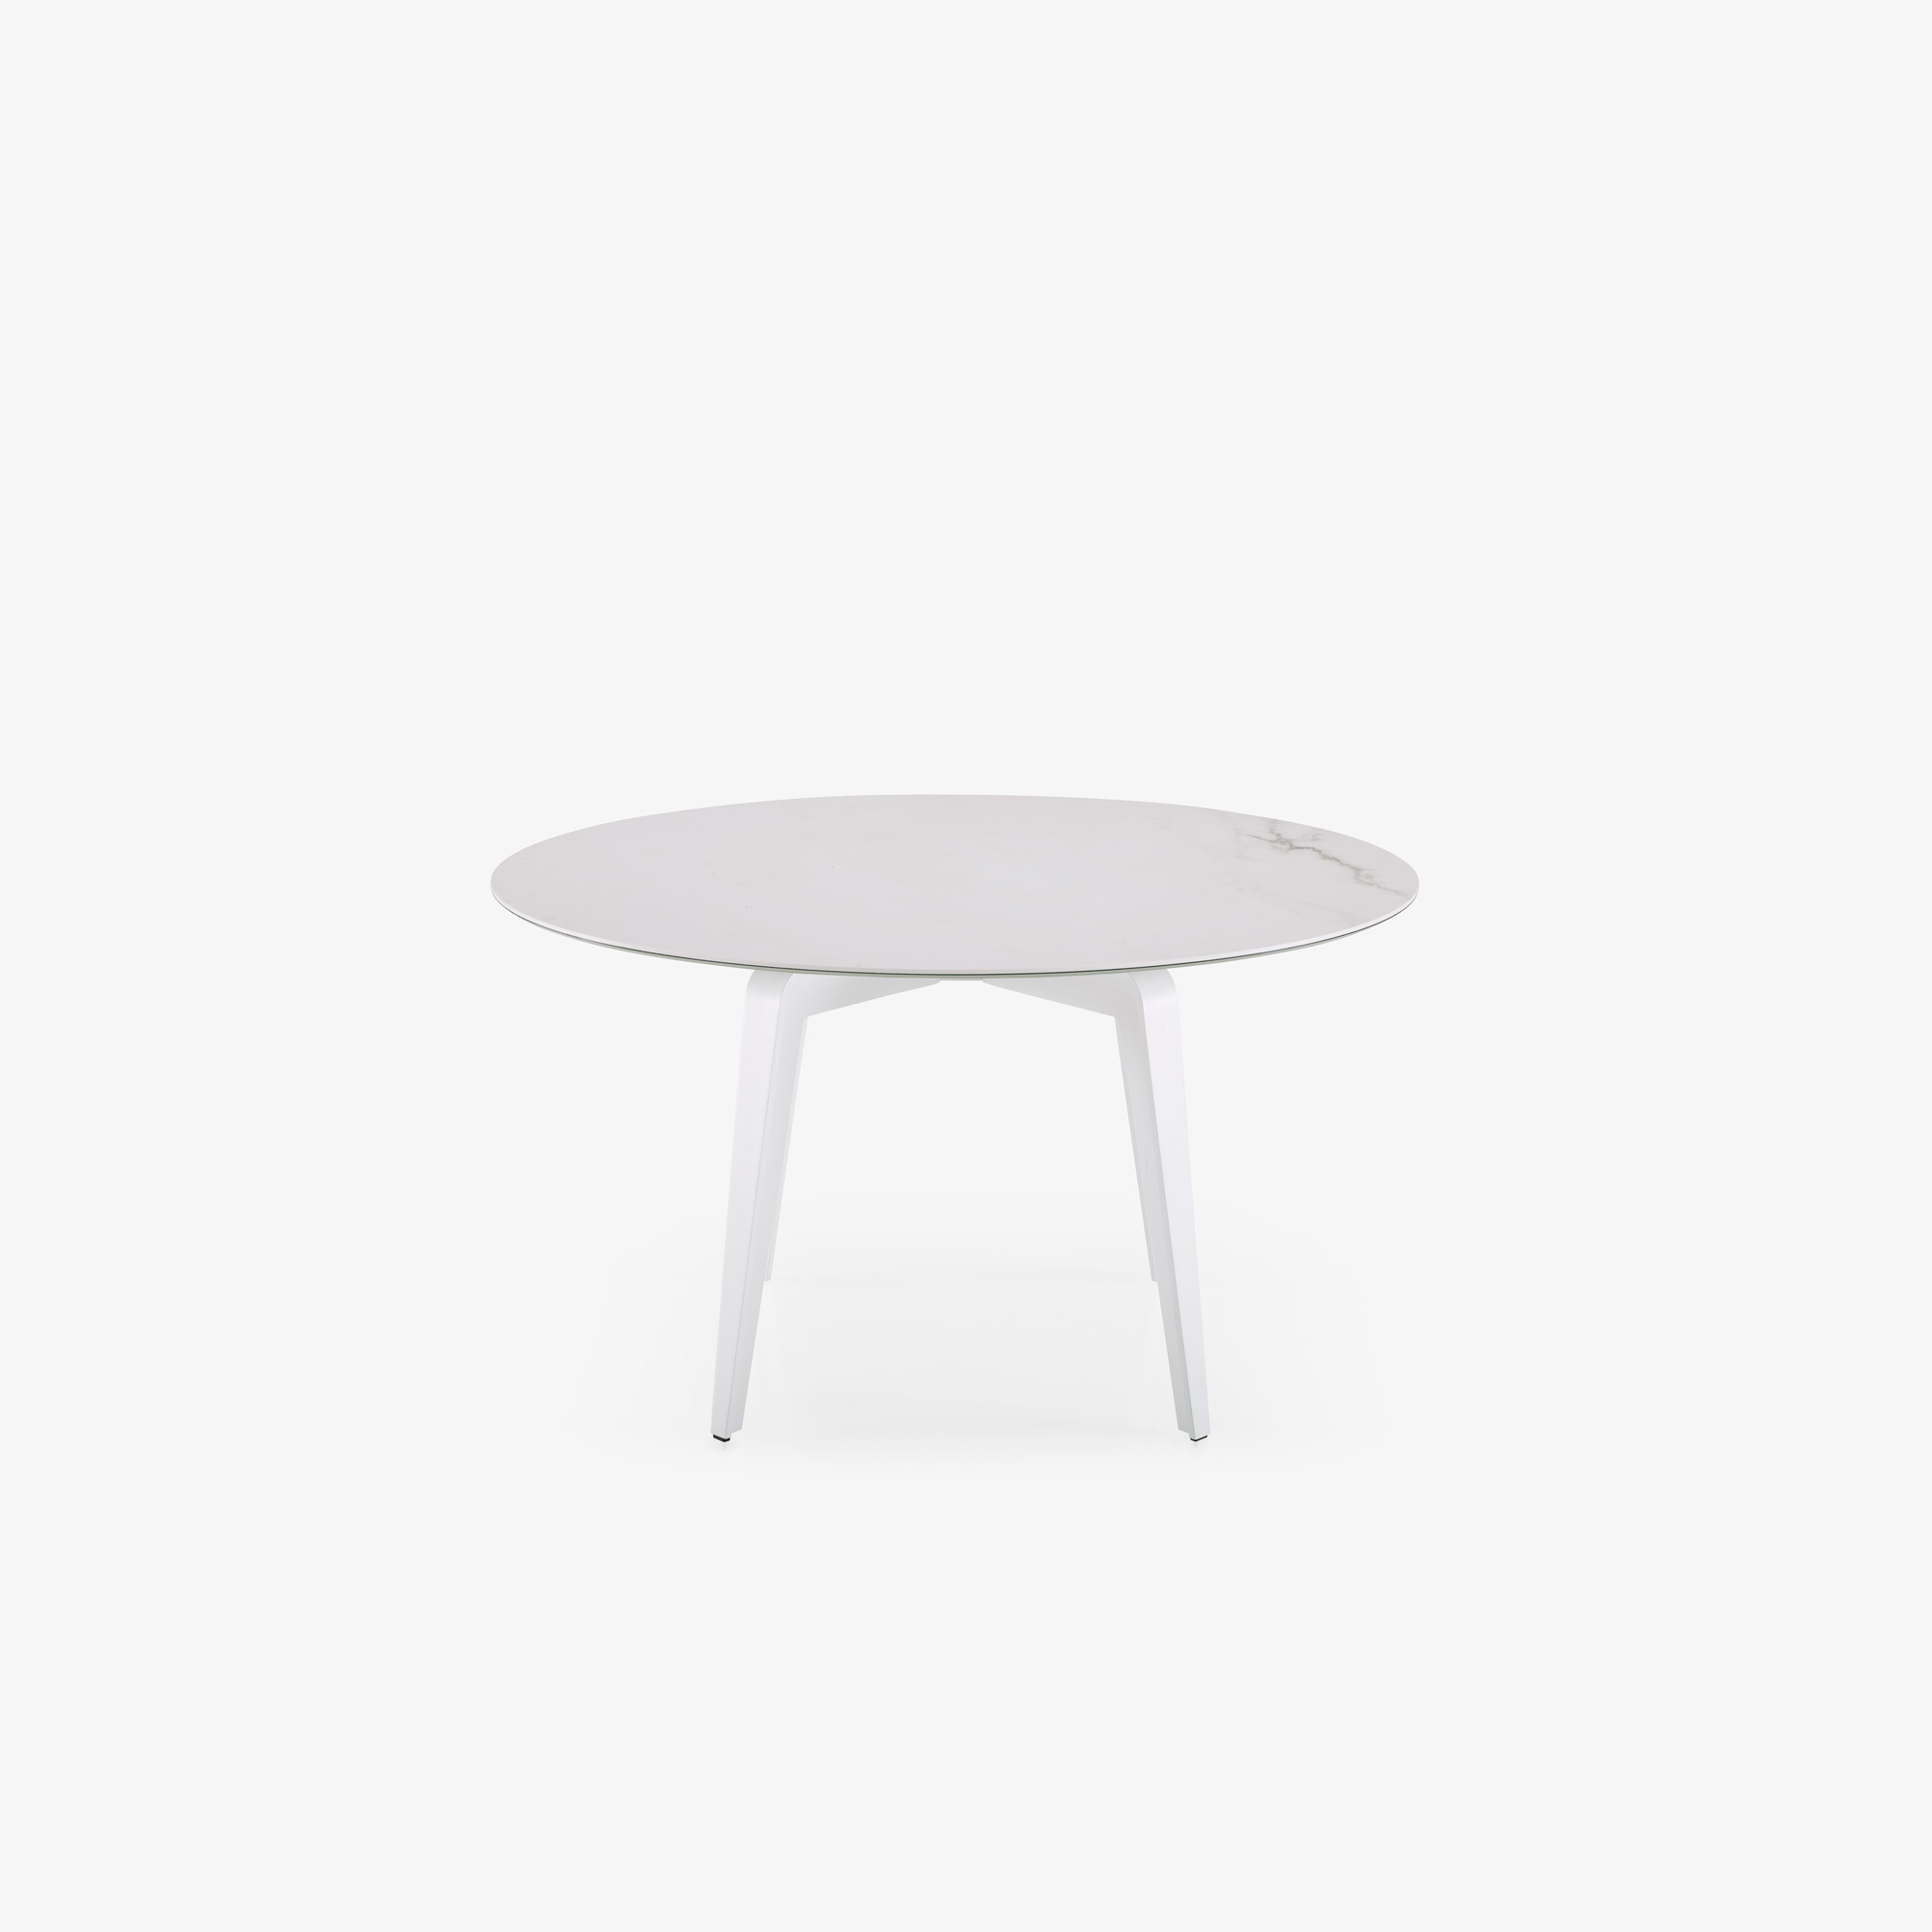 Image ROUND DINING TABLE WHITE LACQUERED BASE 